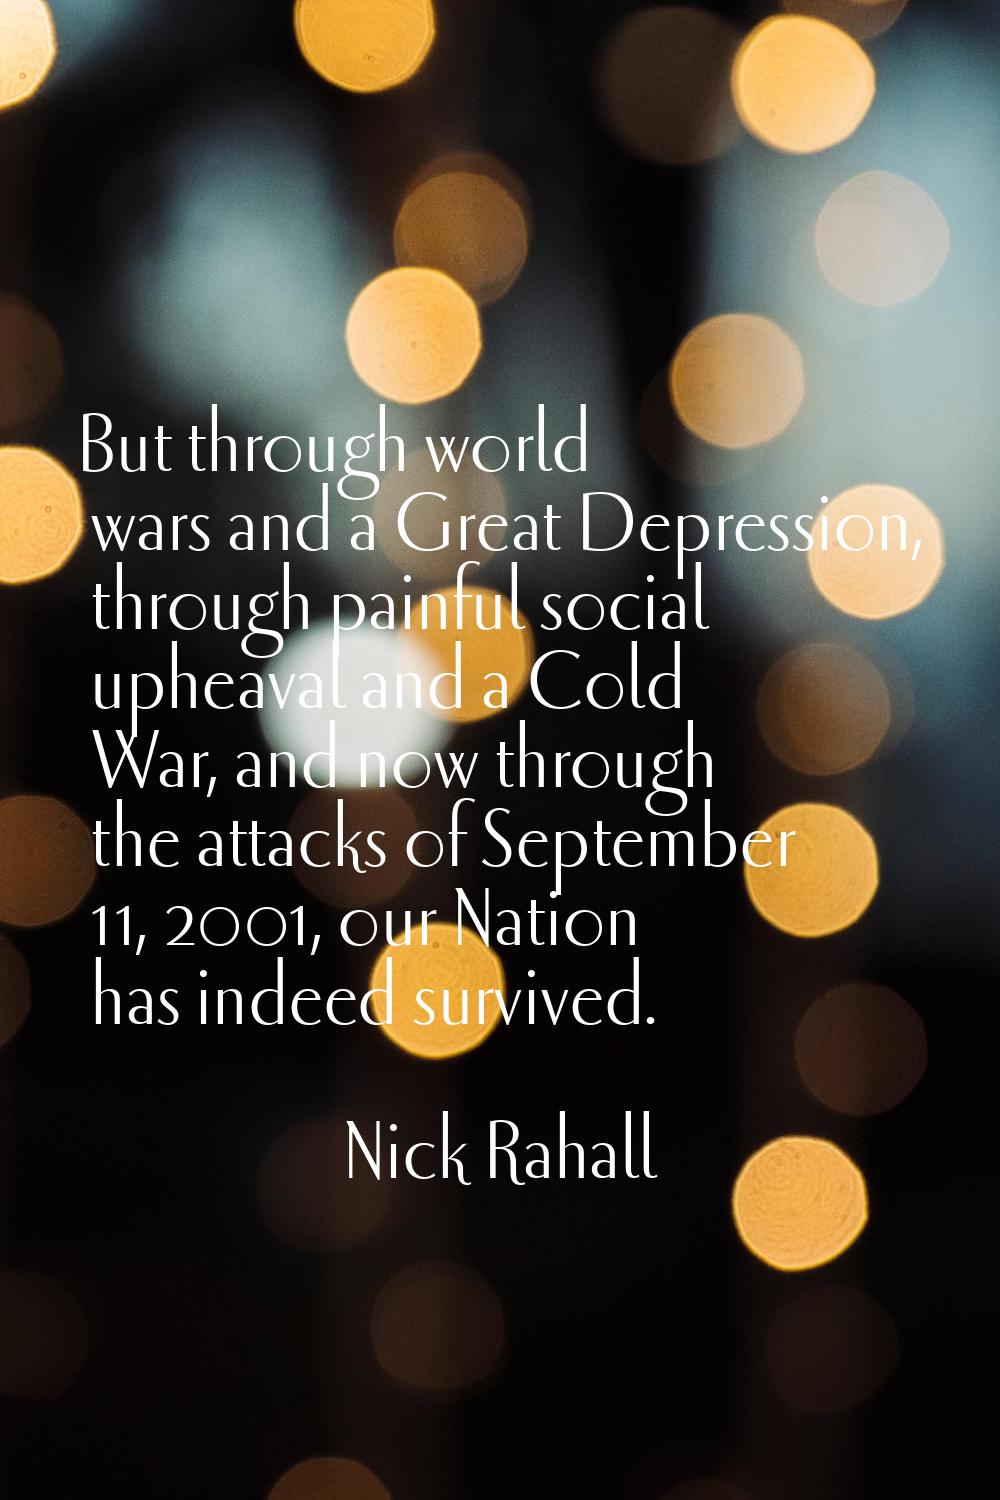 But through world wars and a Great Depression, through painful social upheaval and a Cold War, and 